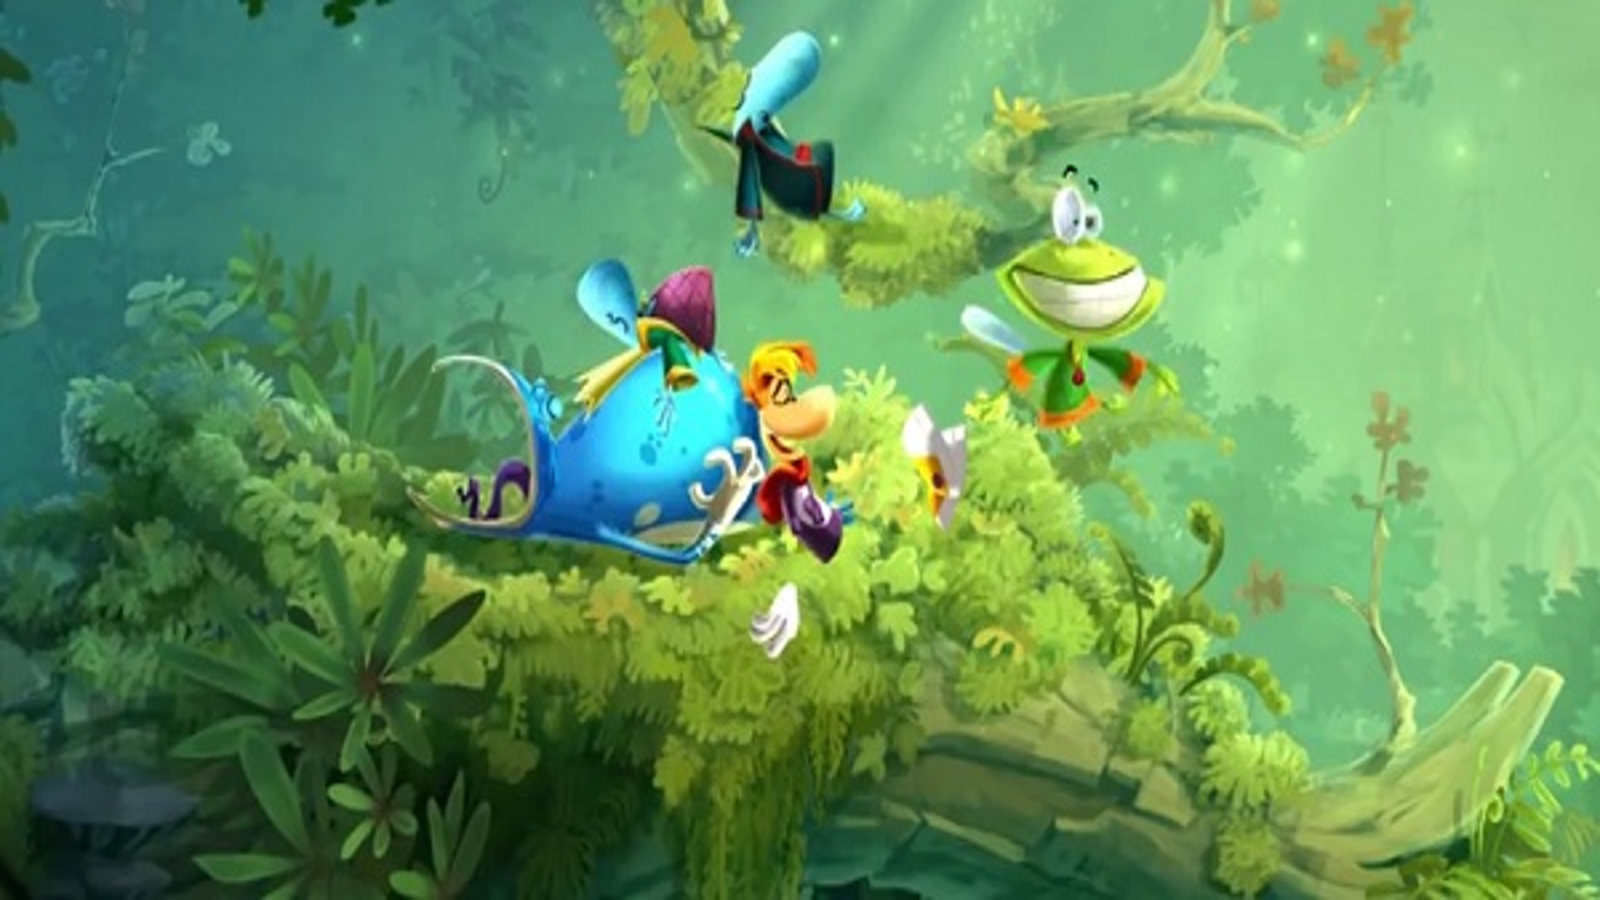 Rayman Legends' Review: Platforming Perfection (Wii U)